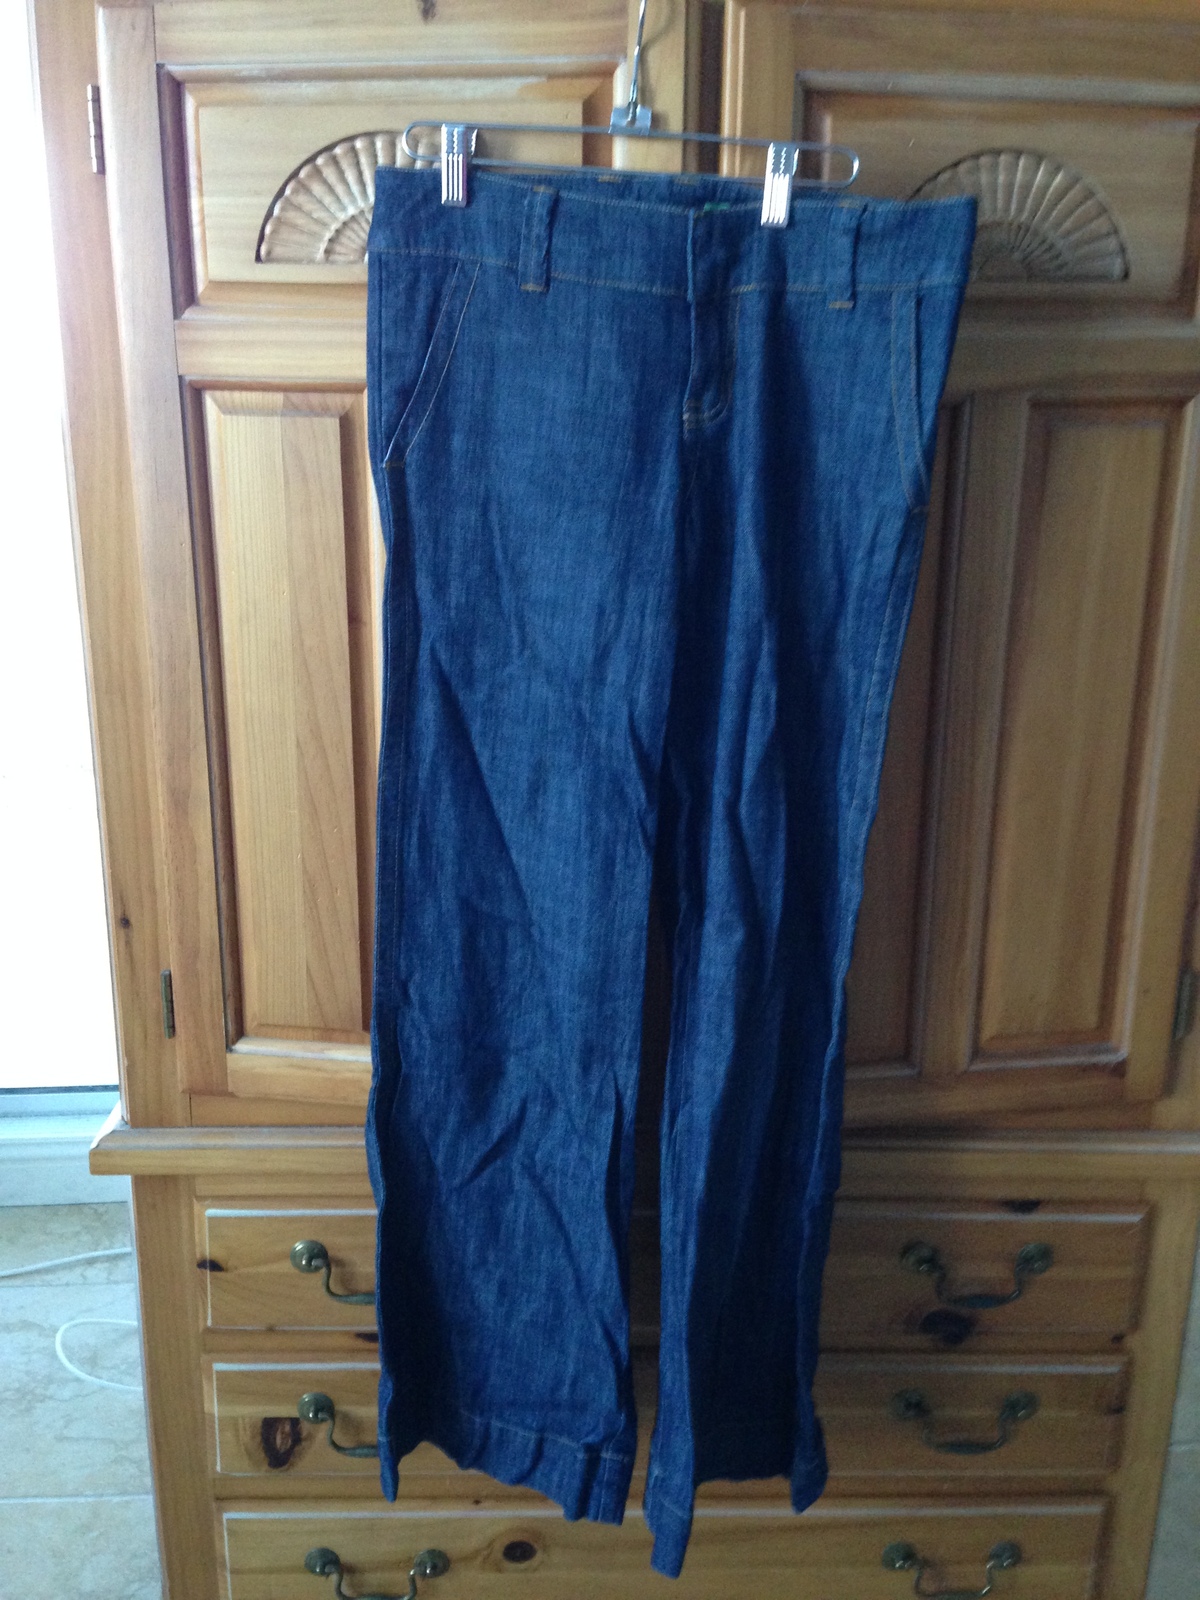 50% off mfr retail price juniors roxy blue jeans San-o relaxed fit size 5  - $24.99